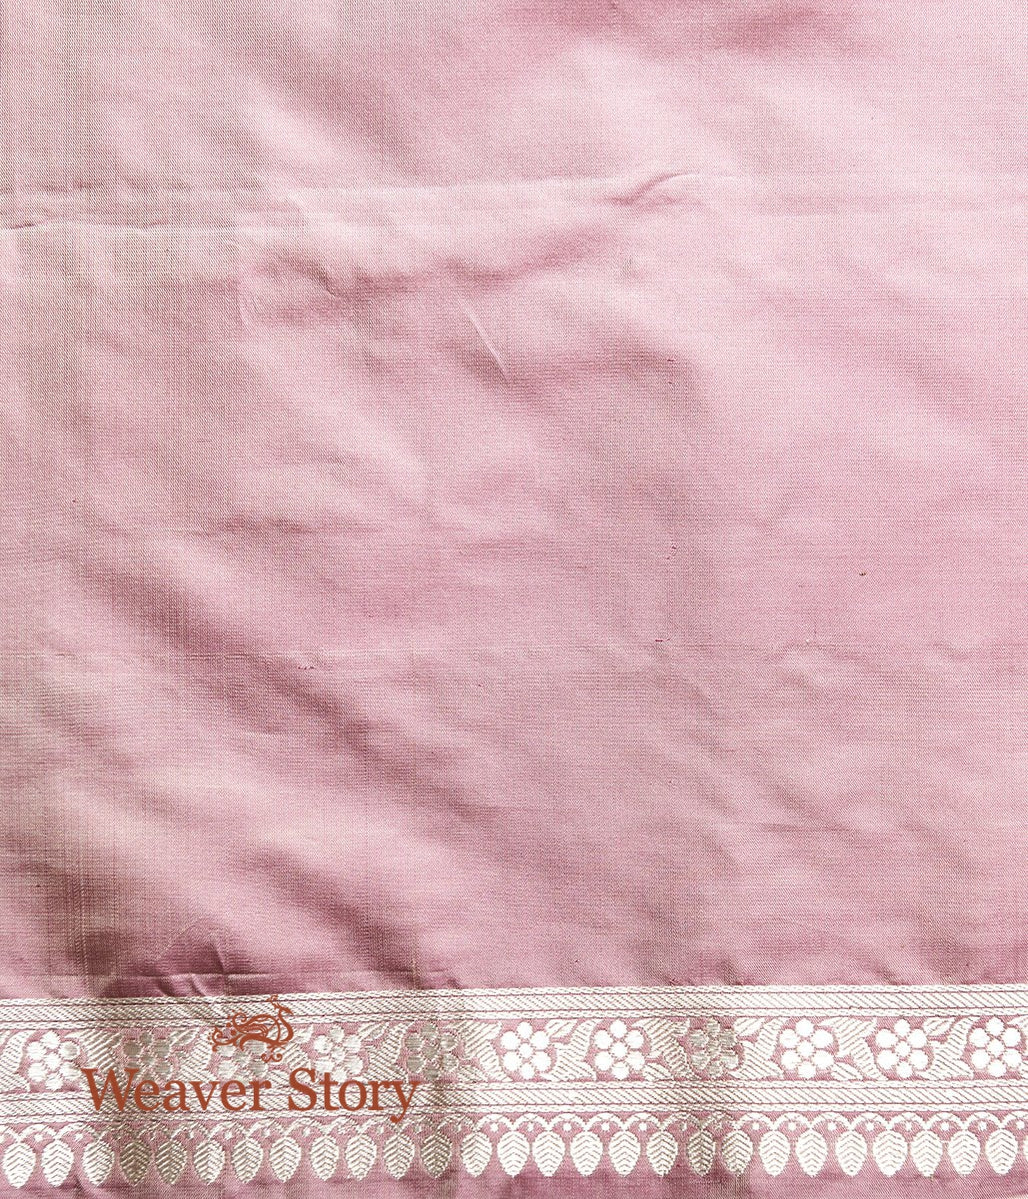 Handwoven_Rose_Pink_Twin_Motif_Saree_with_Silver_Border_WeaverStory_05